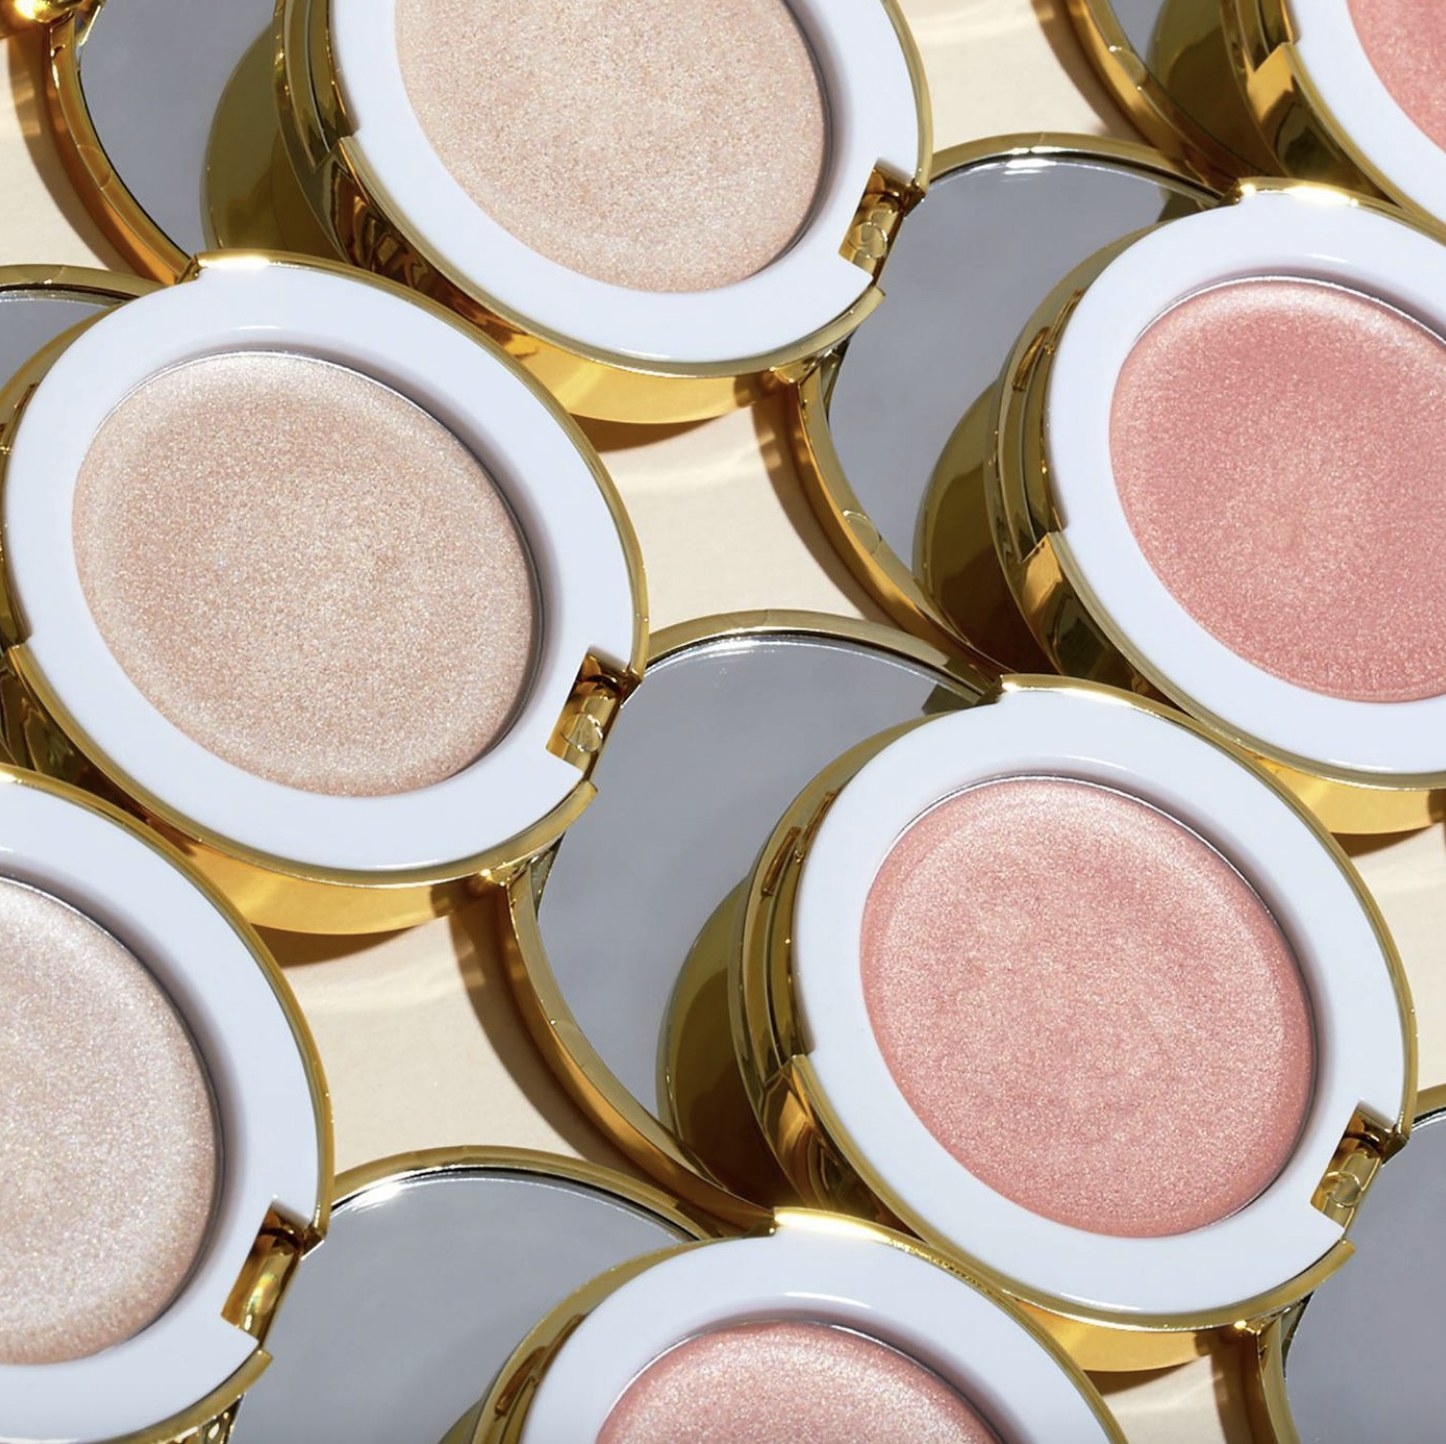 A collection of cream highlighters in gold compacts